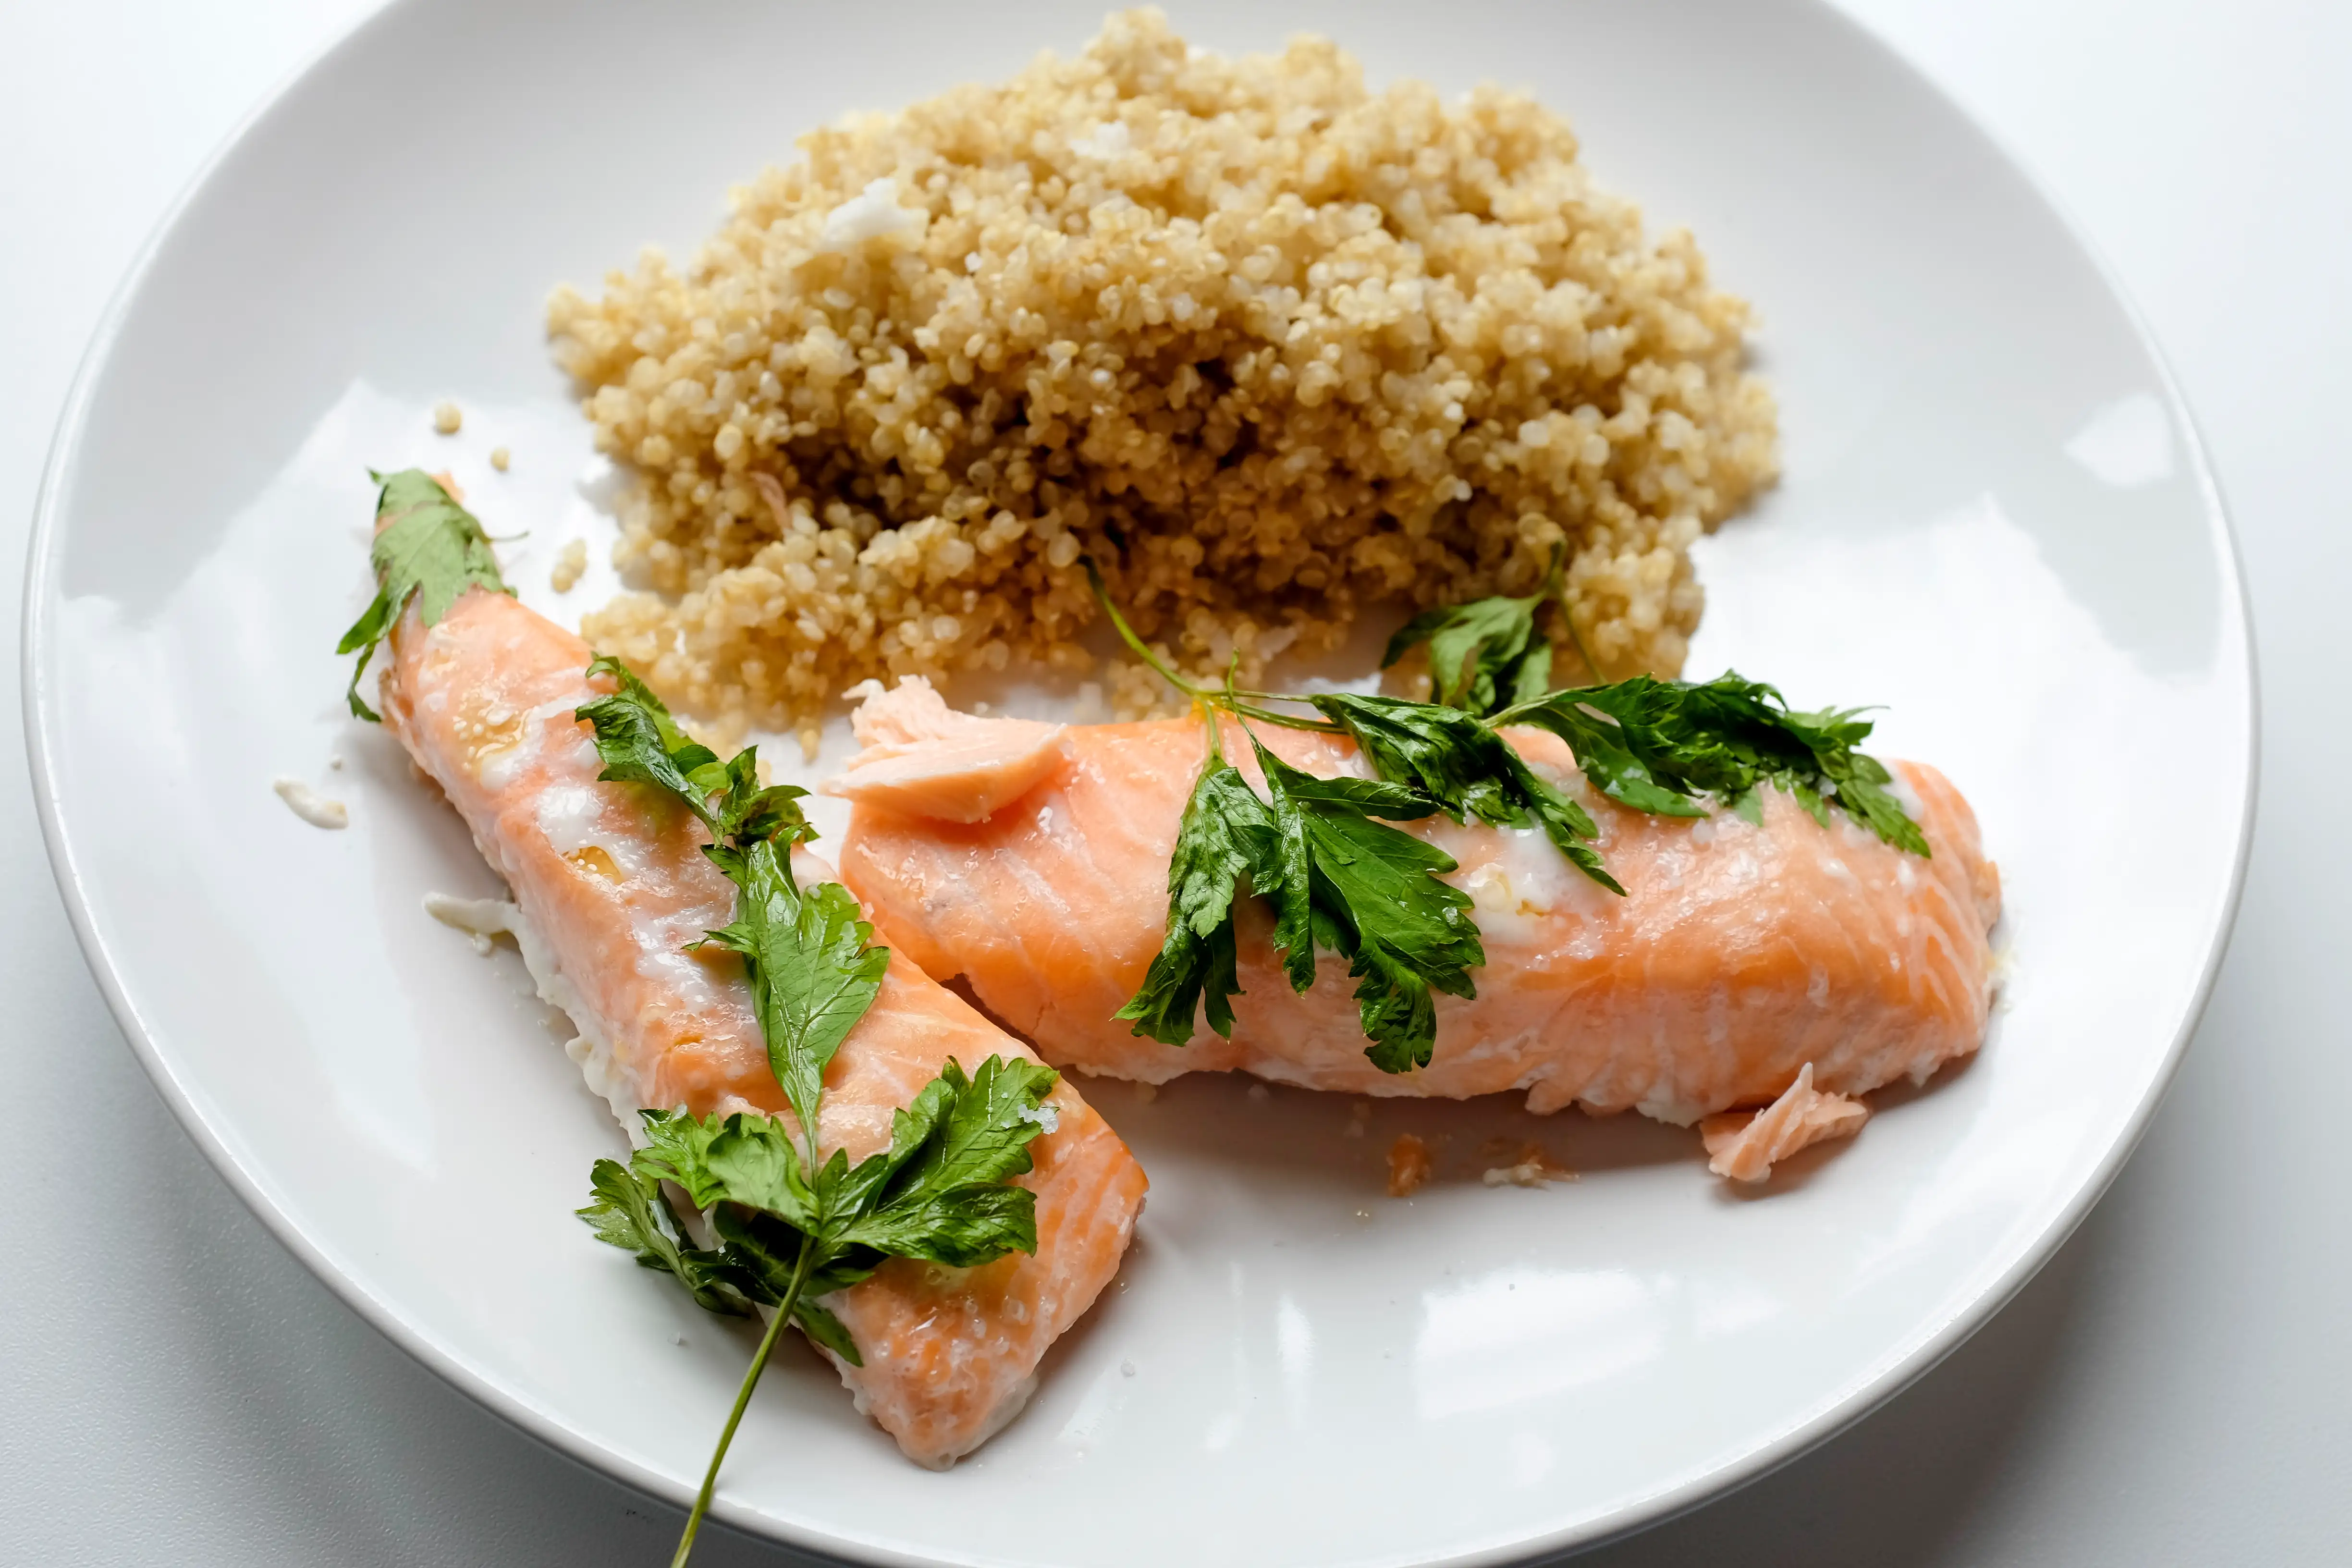 Plate of salmon with quinoa